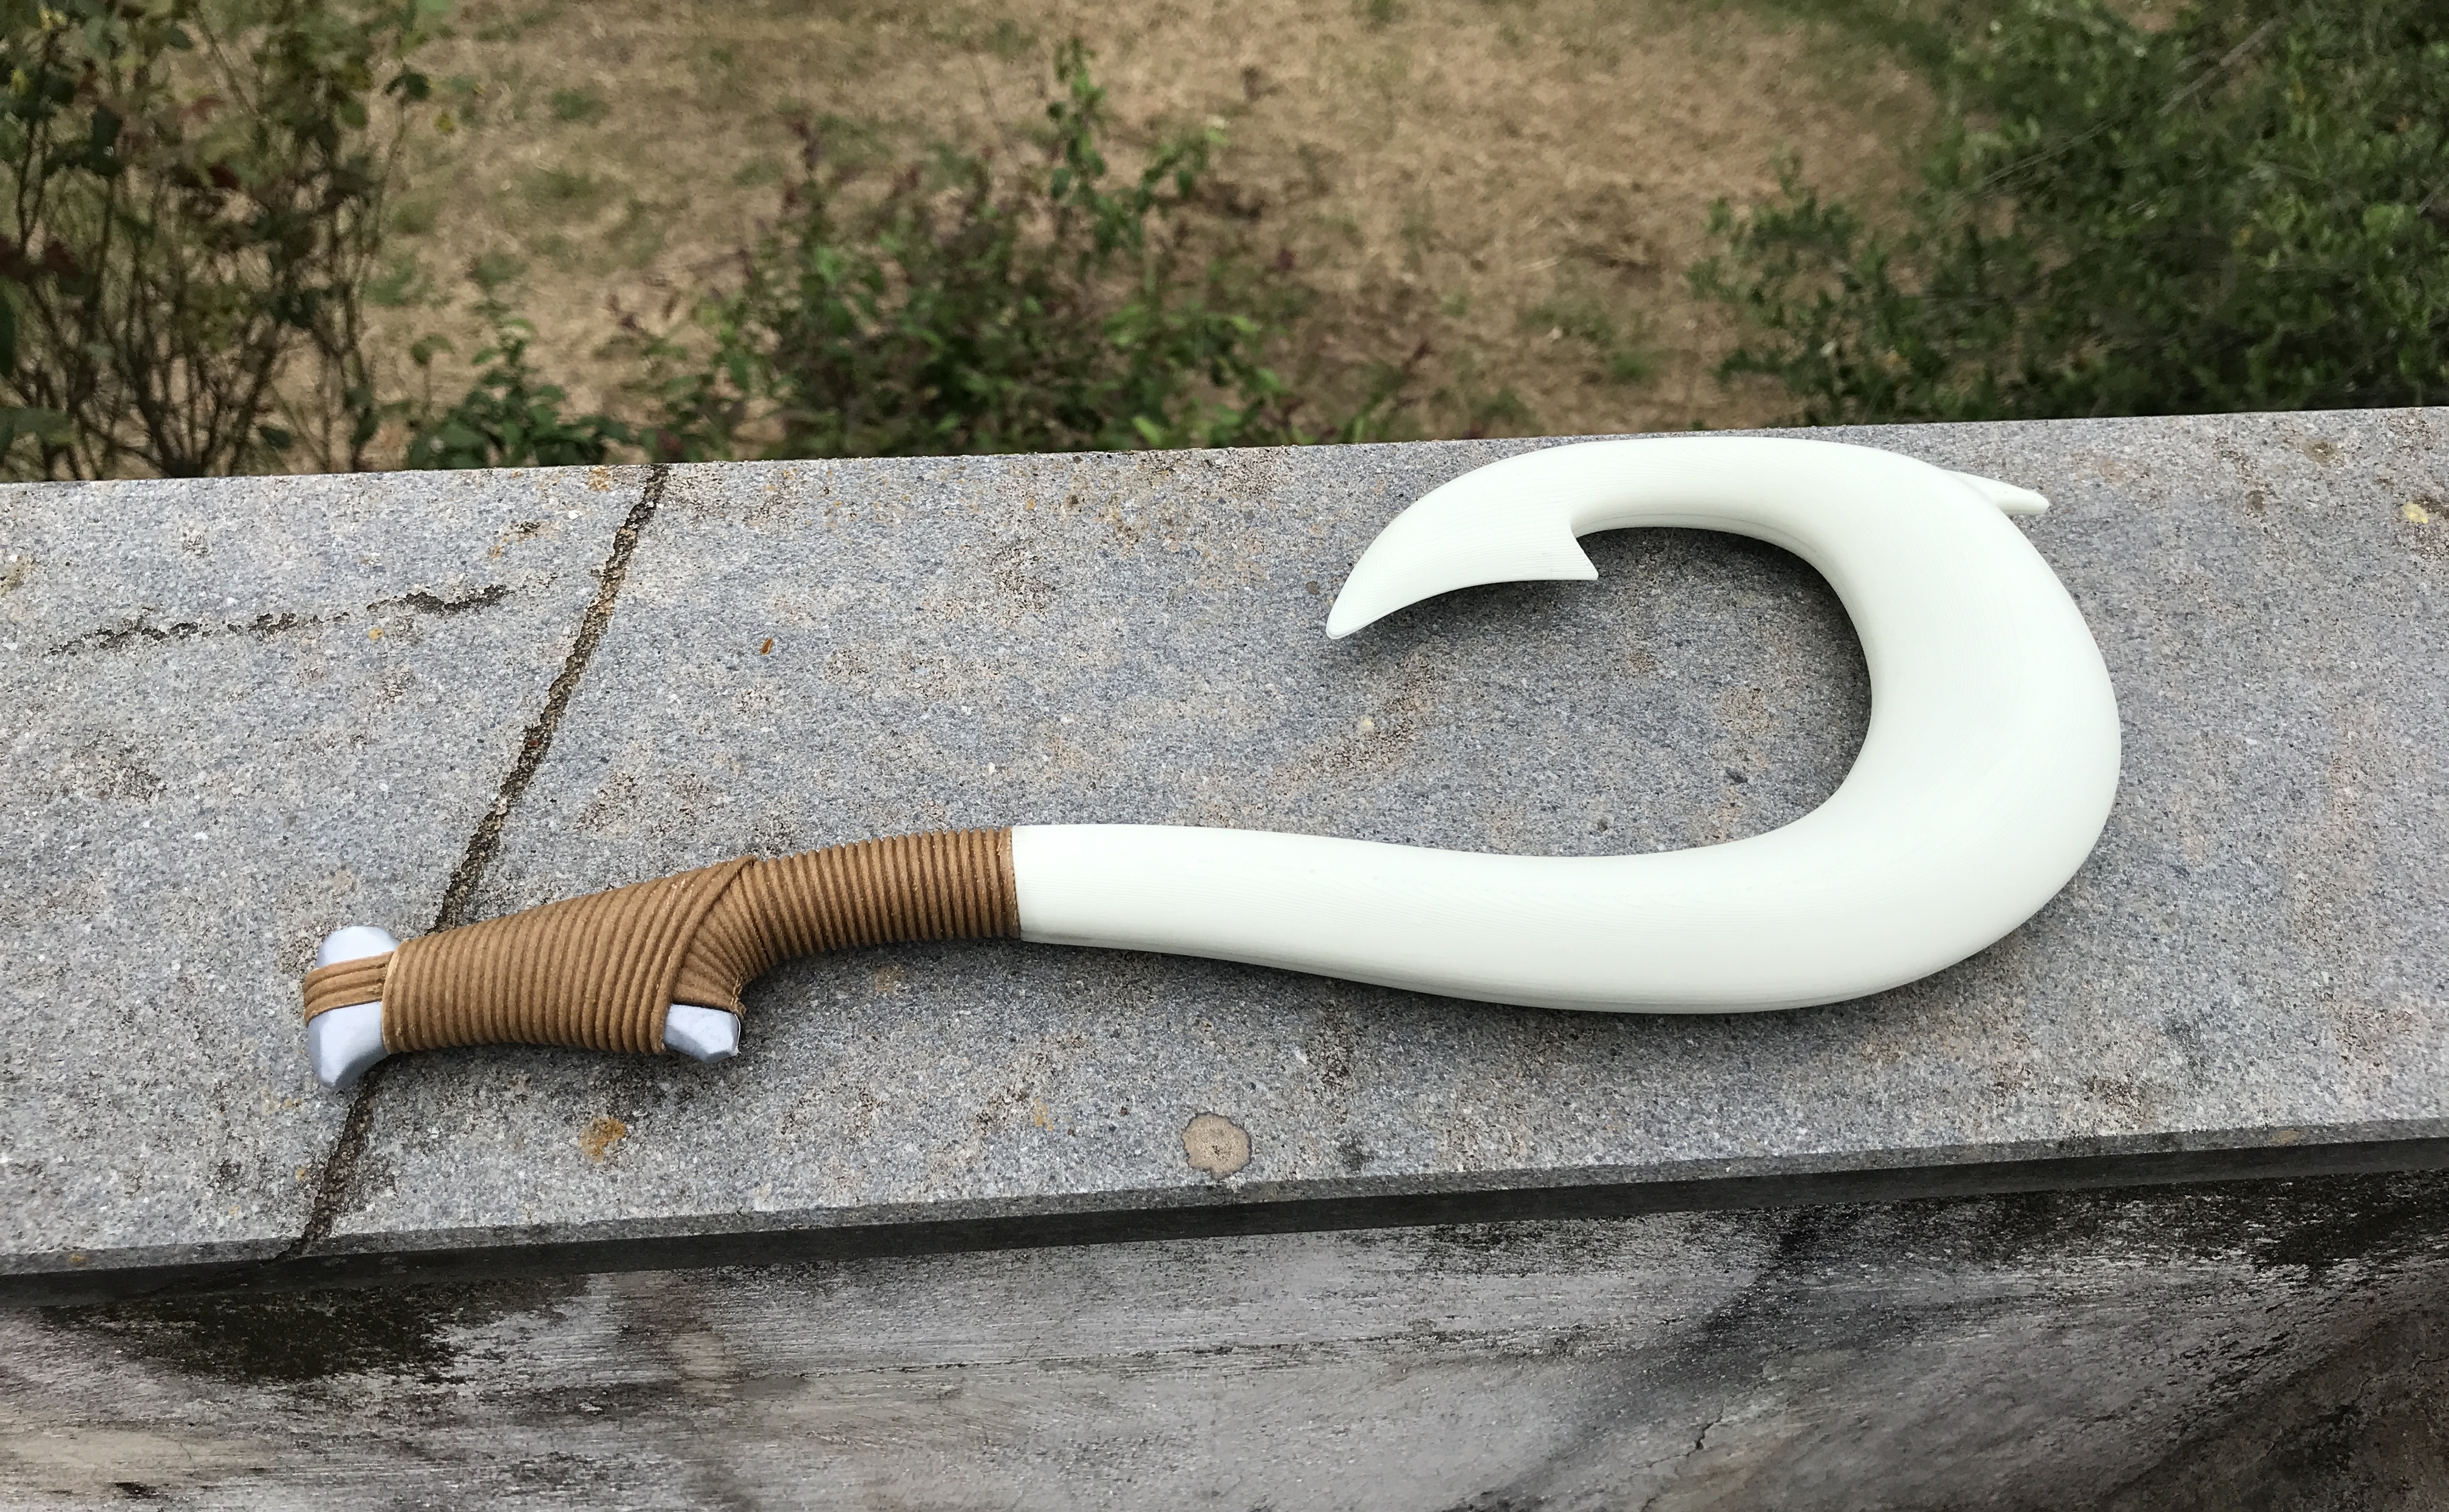 3D Printable Maui's magical fish hook from the movie Moana by Martin Moore